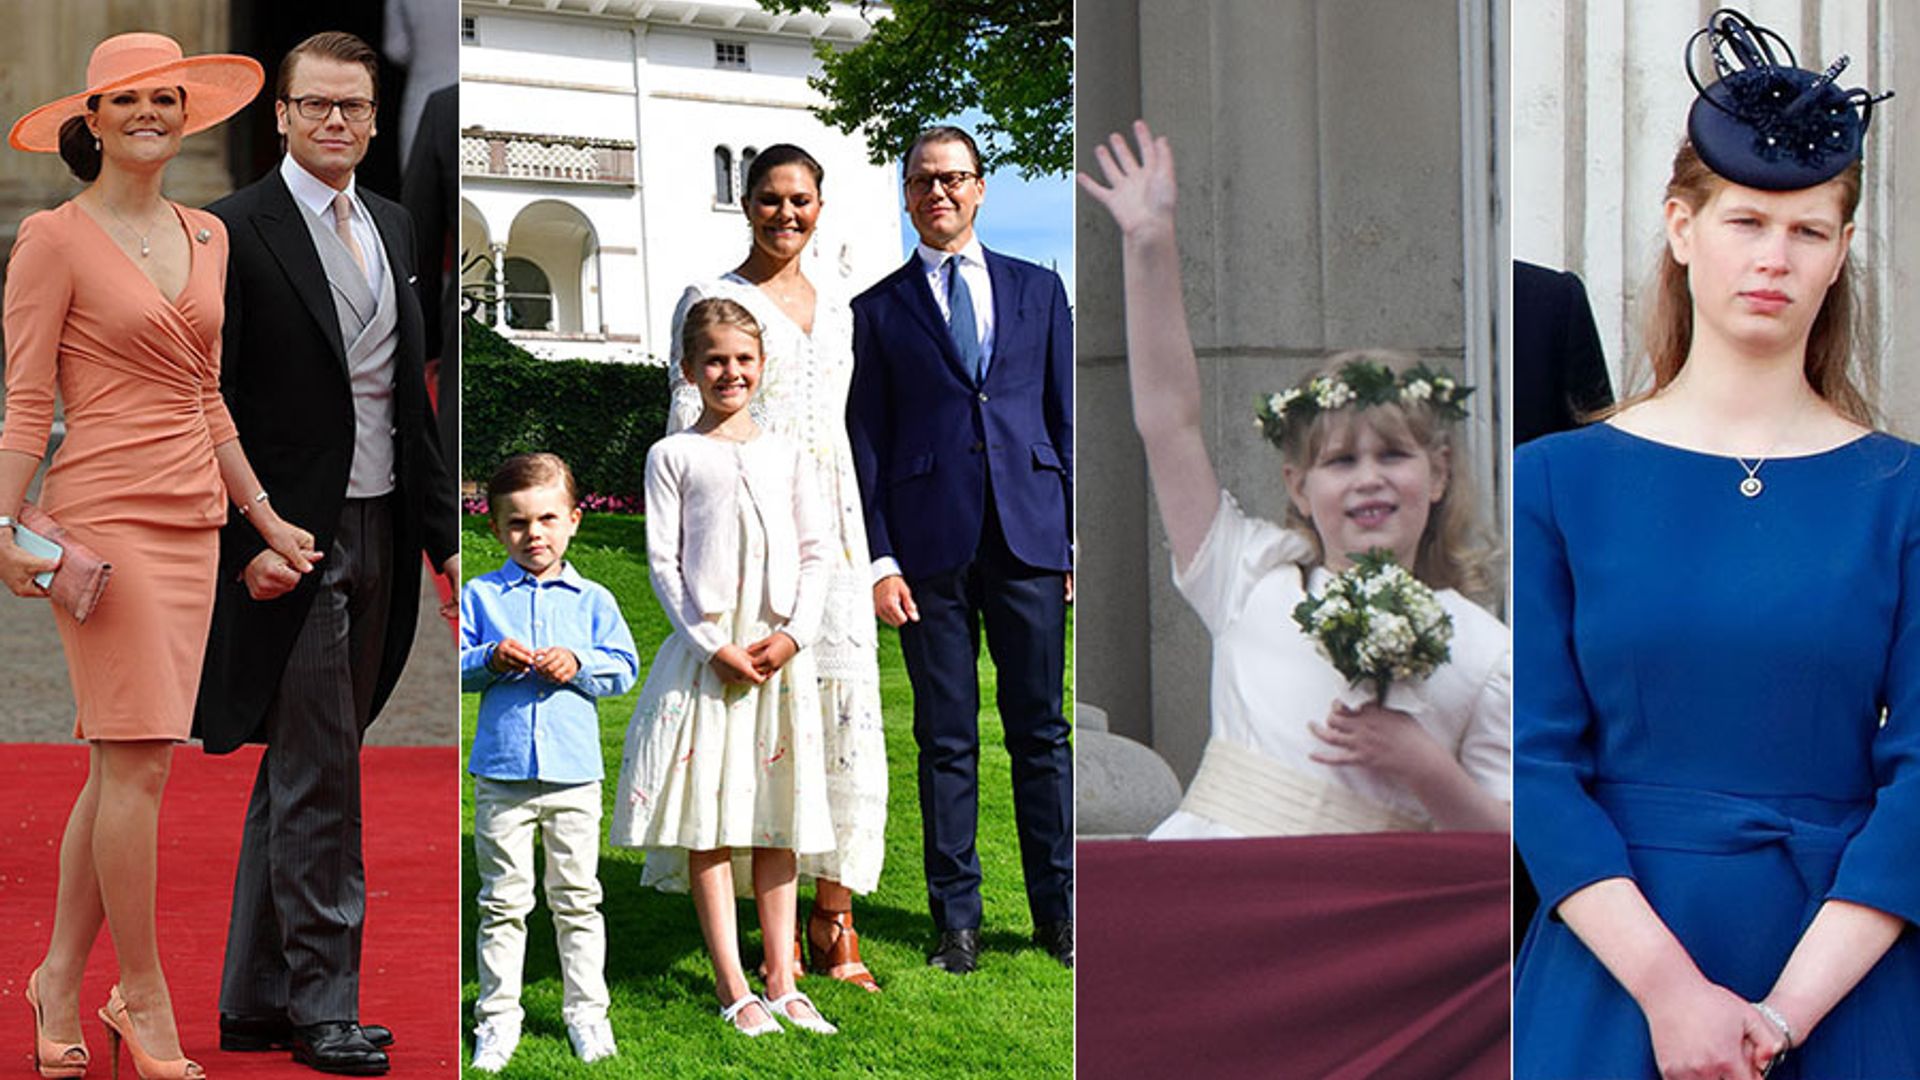 Now and then: How Prince William and Duchess Kate's royal wedding guests' lives have changed since 2011 